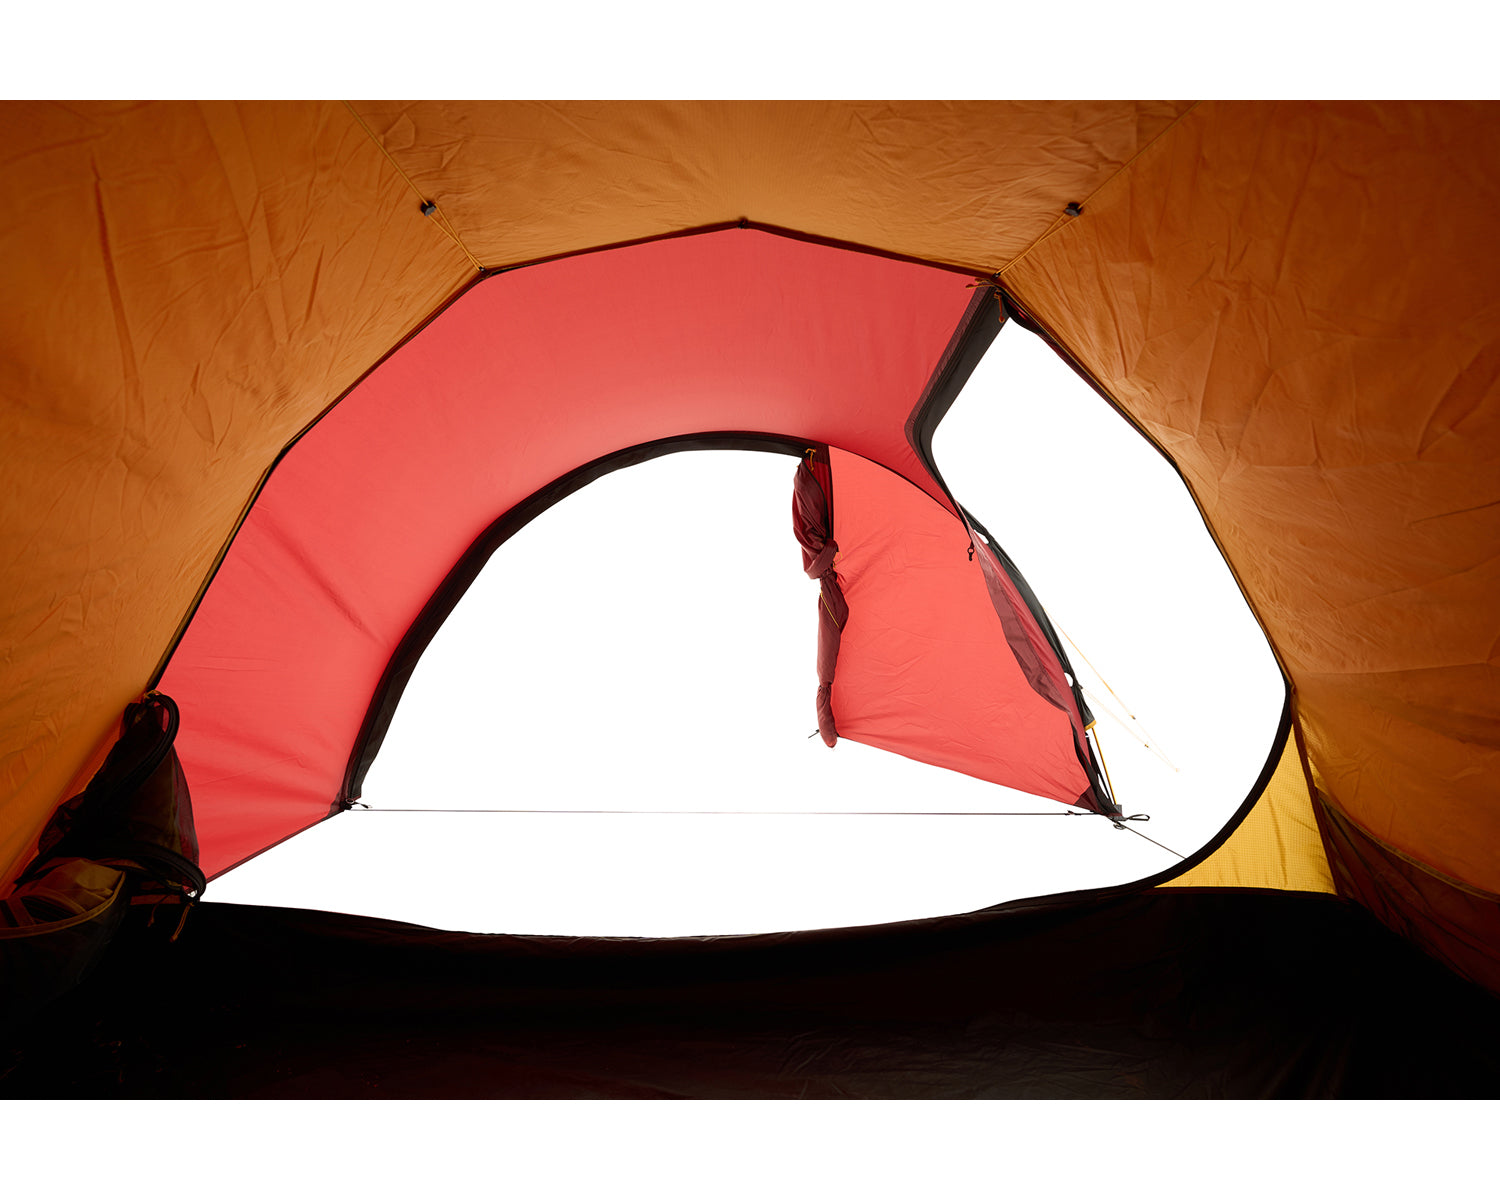 Seiland 3 SP tent - 3 person - Burnt Red